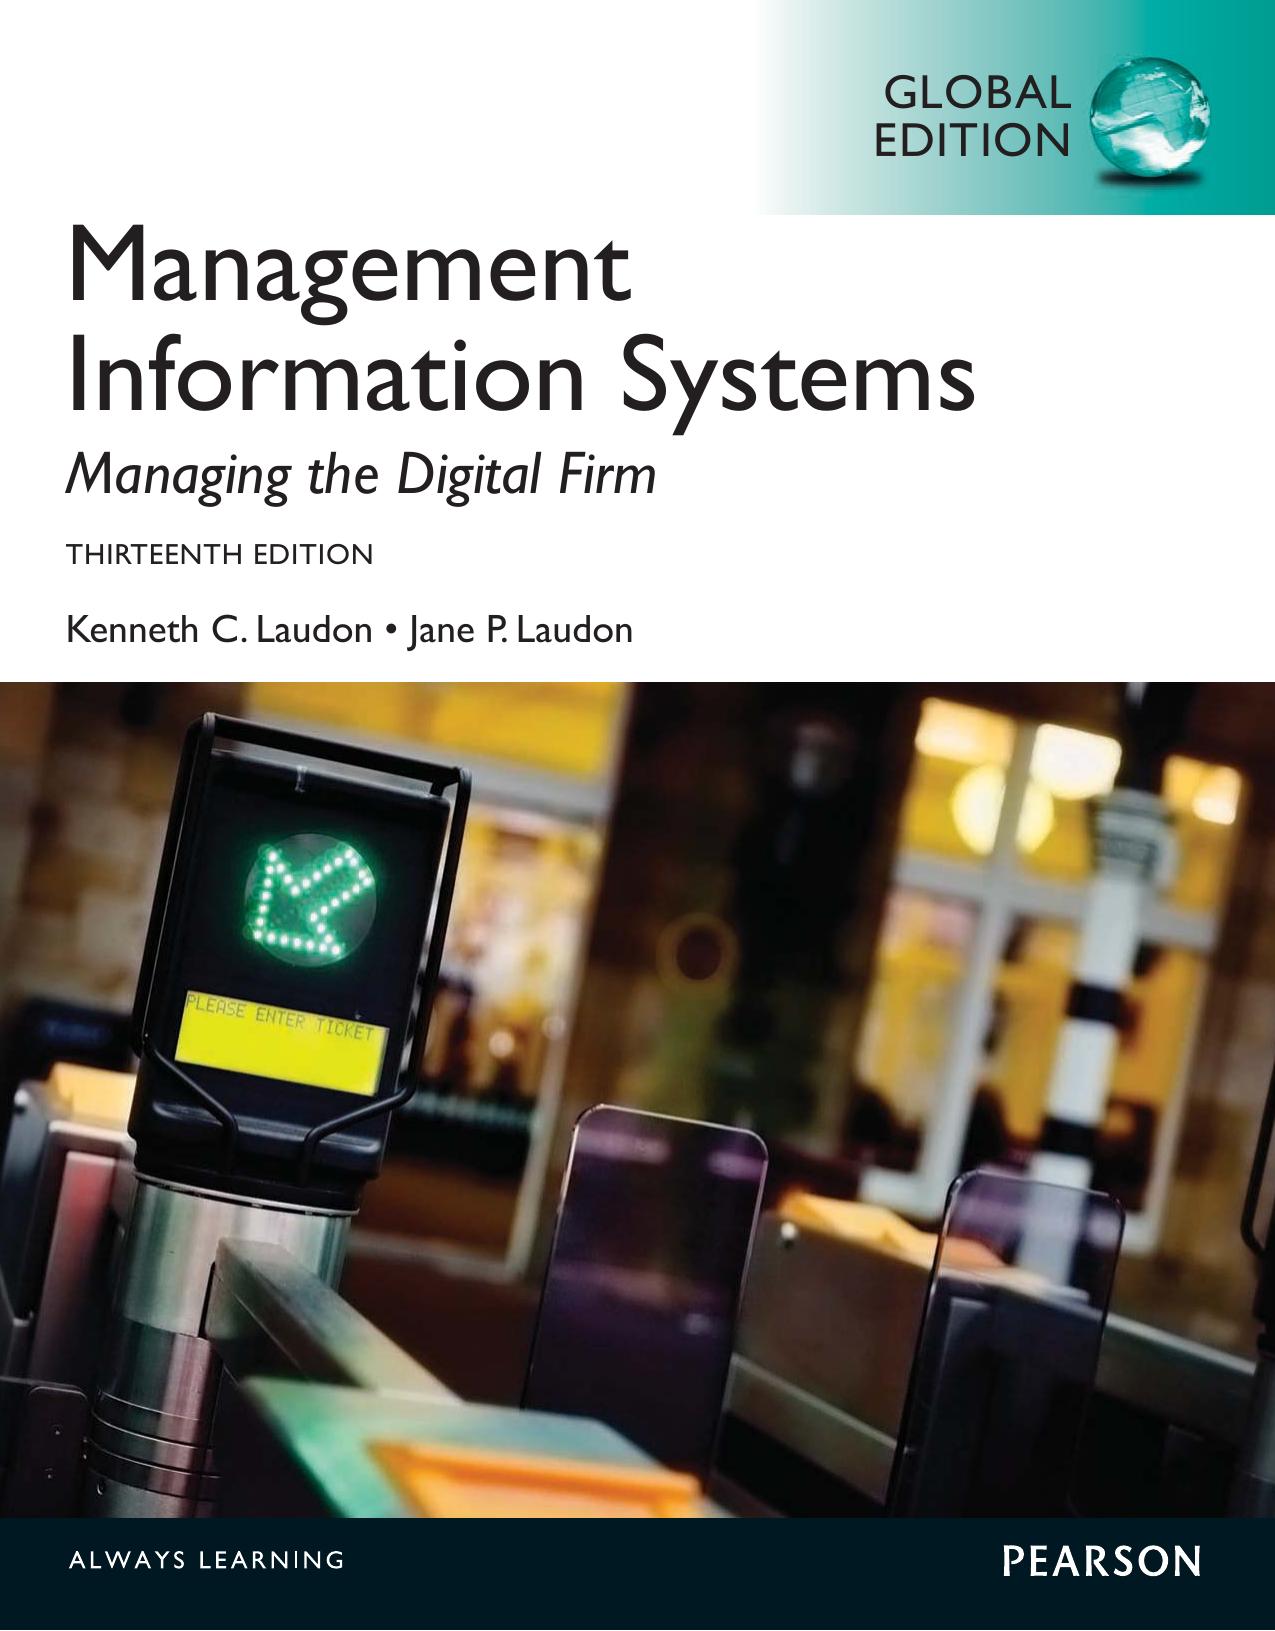 laudon-management-information-systems-13th-global-ed. 2014.pdf